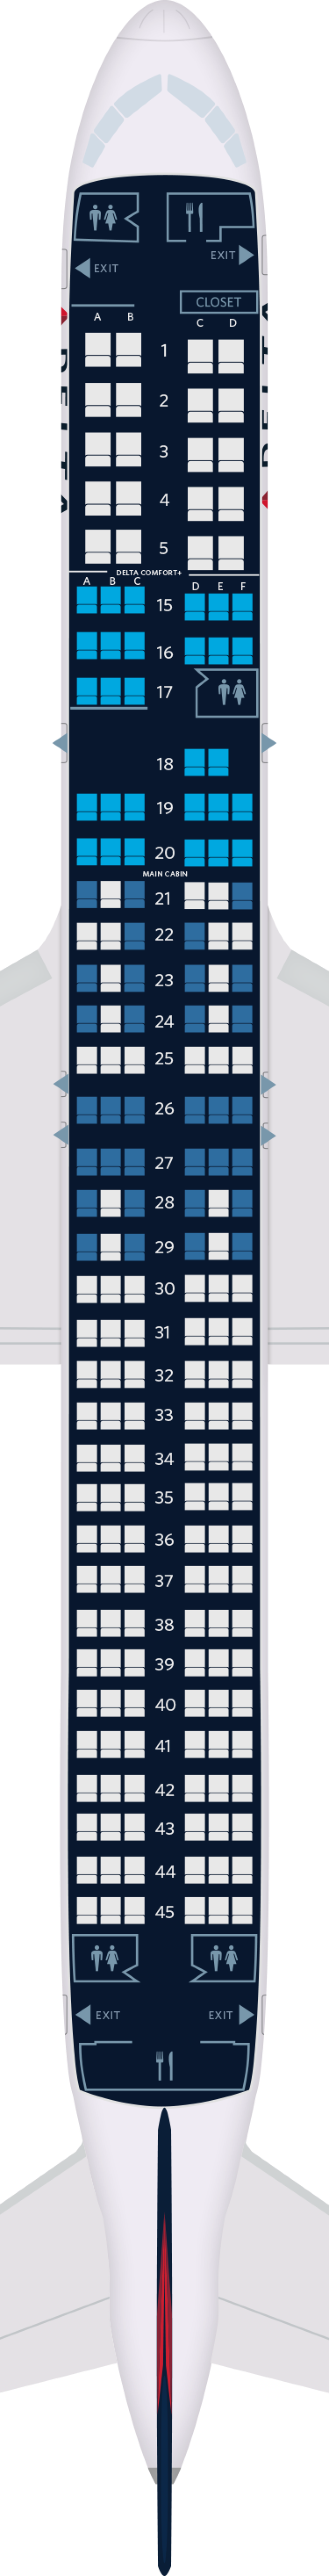 delta airline seat assignments